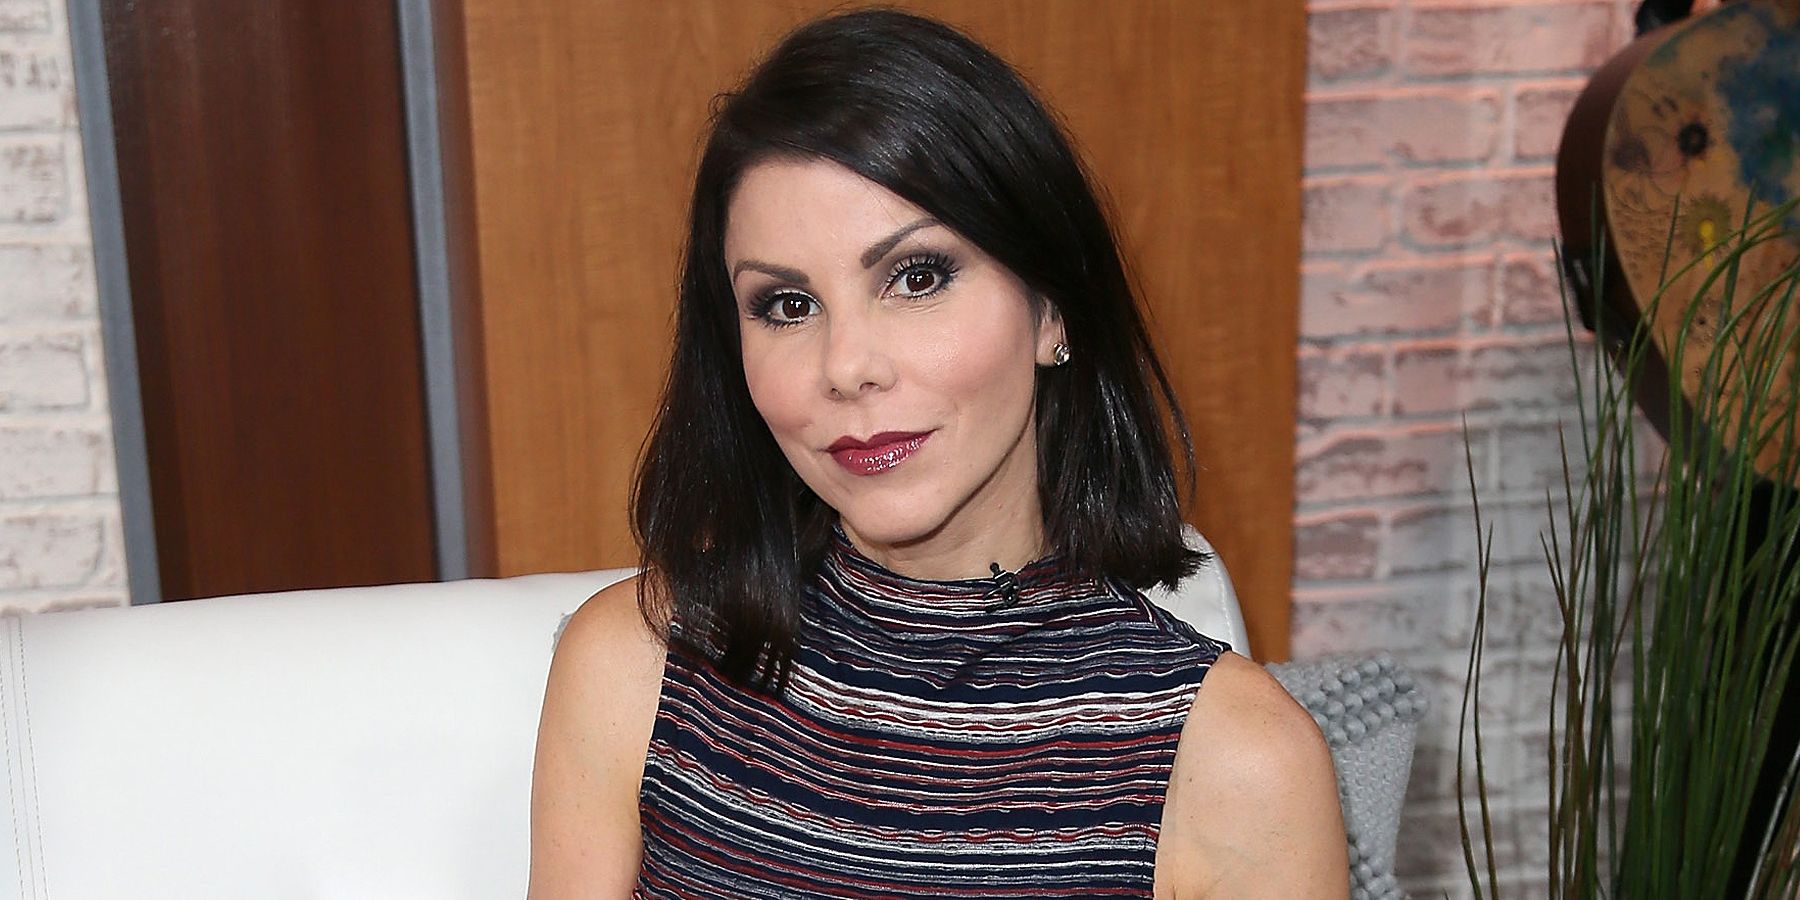 Heather Dubrow from The Real Housewives of Orange County